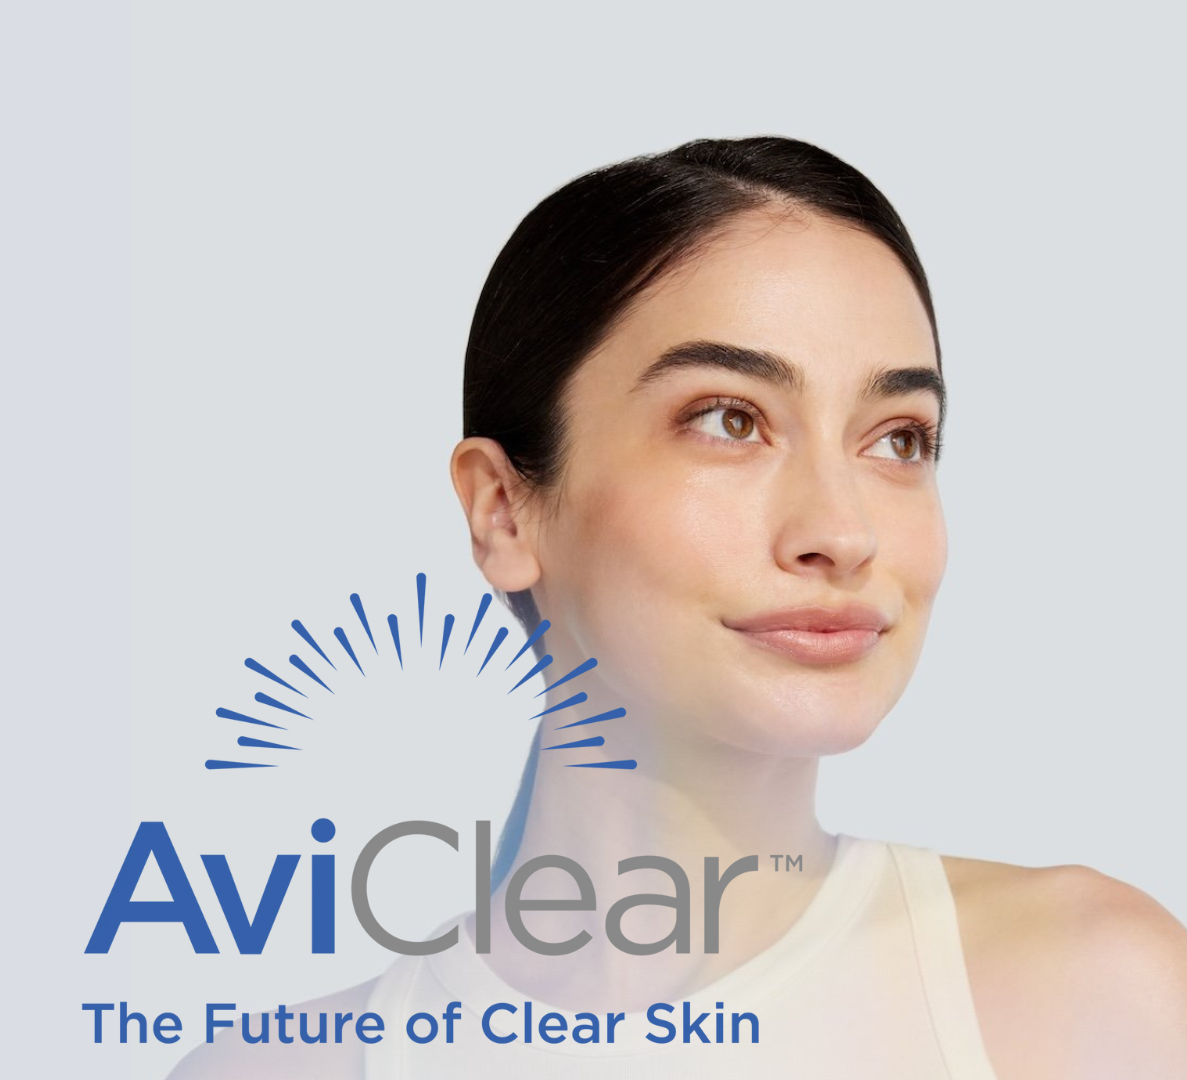 Introducing AviClear : The Revolutionary FDA-Approved Laser Treatment for Acne